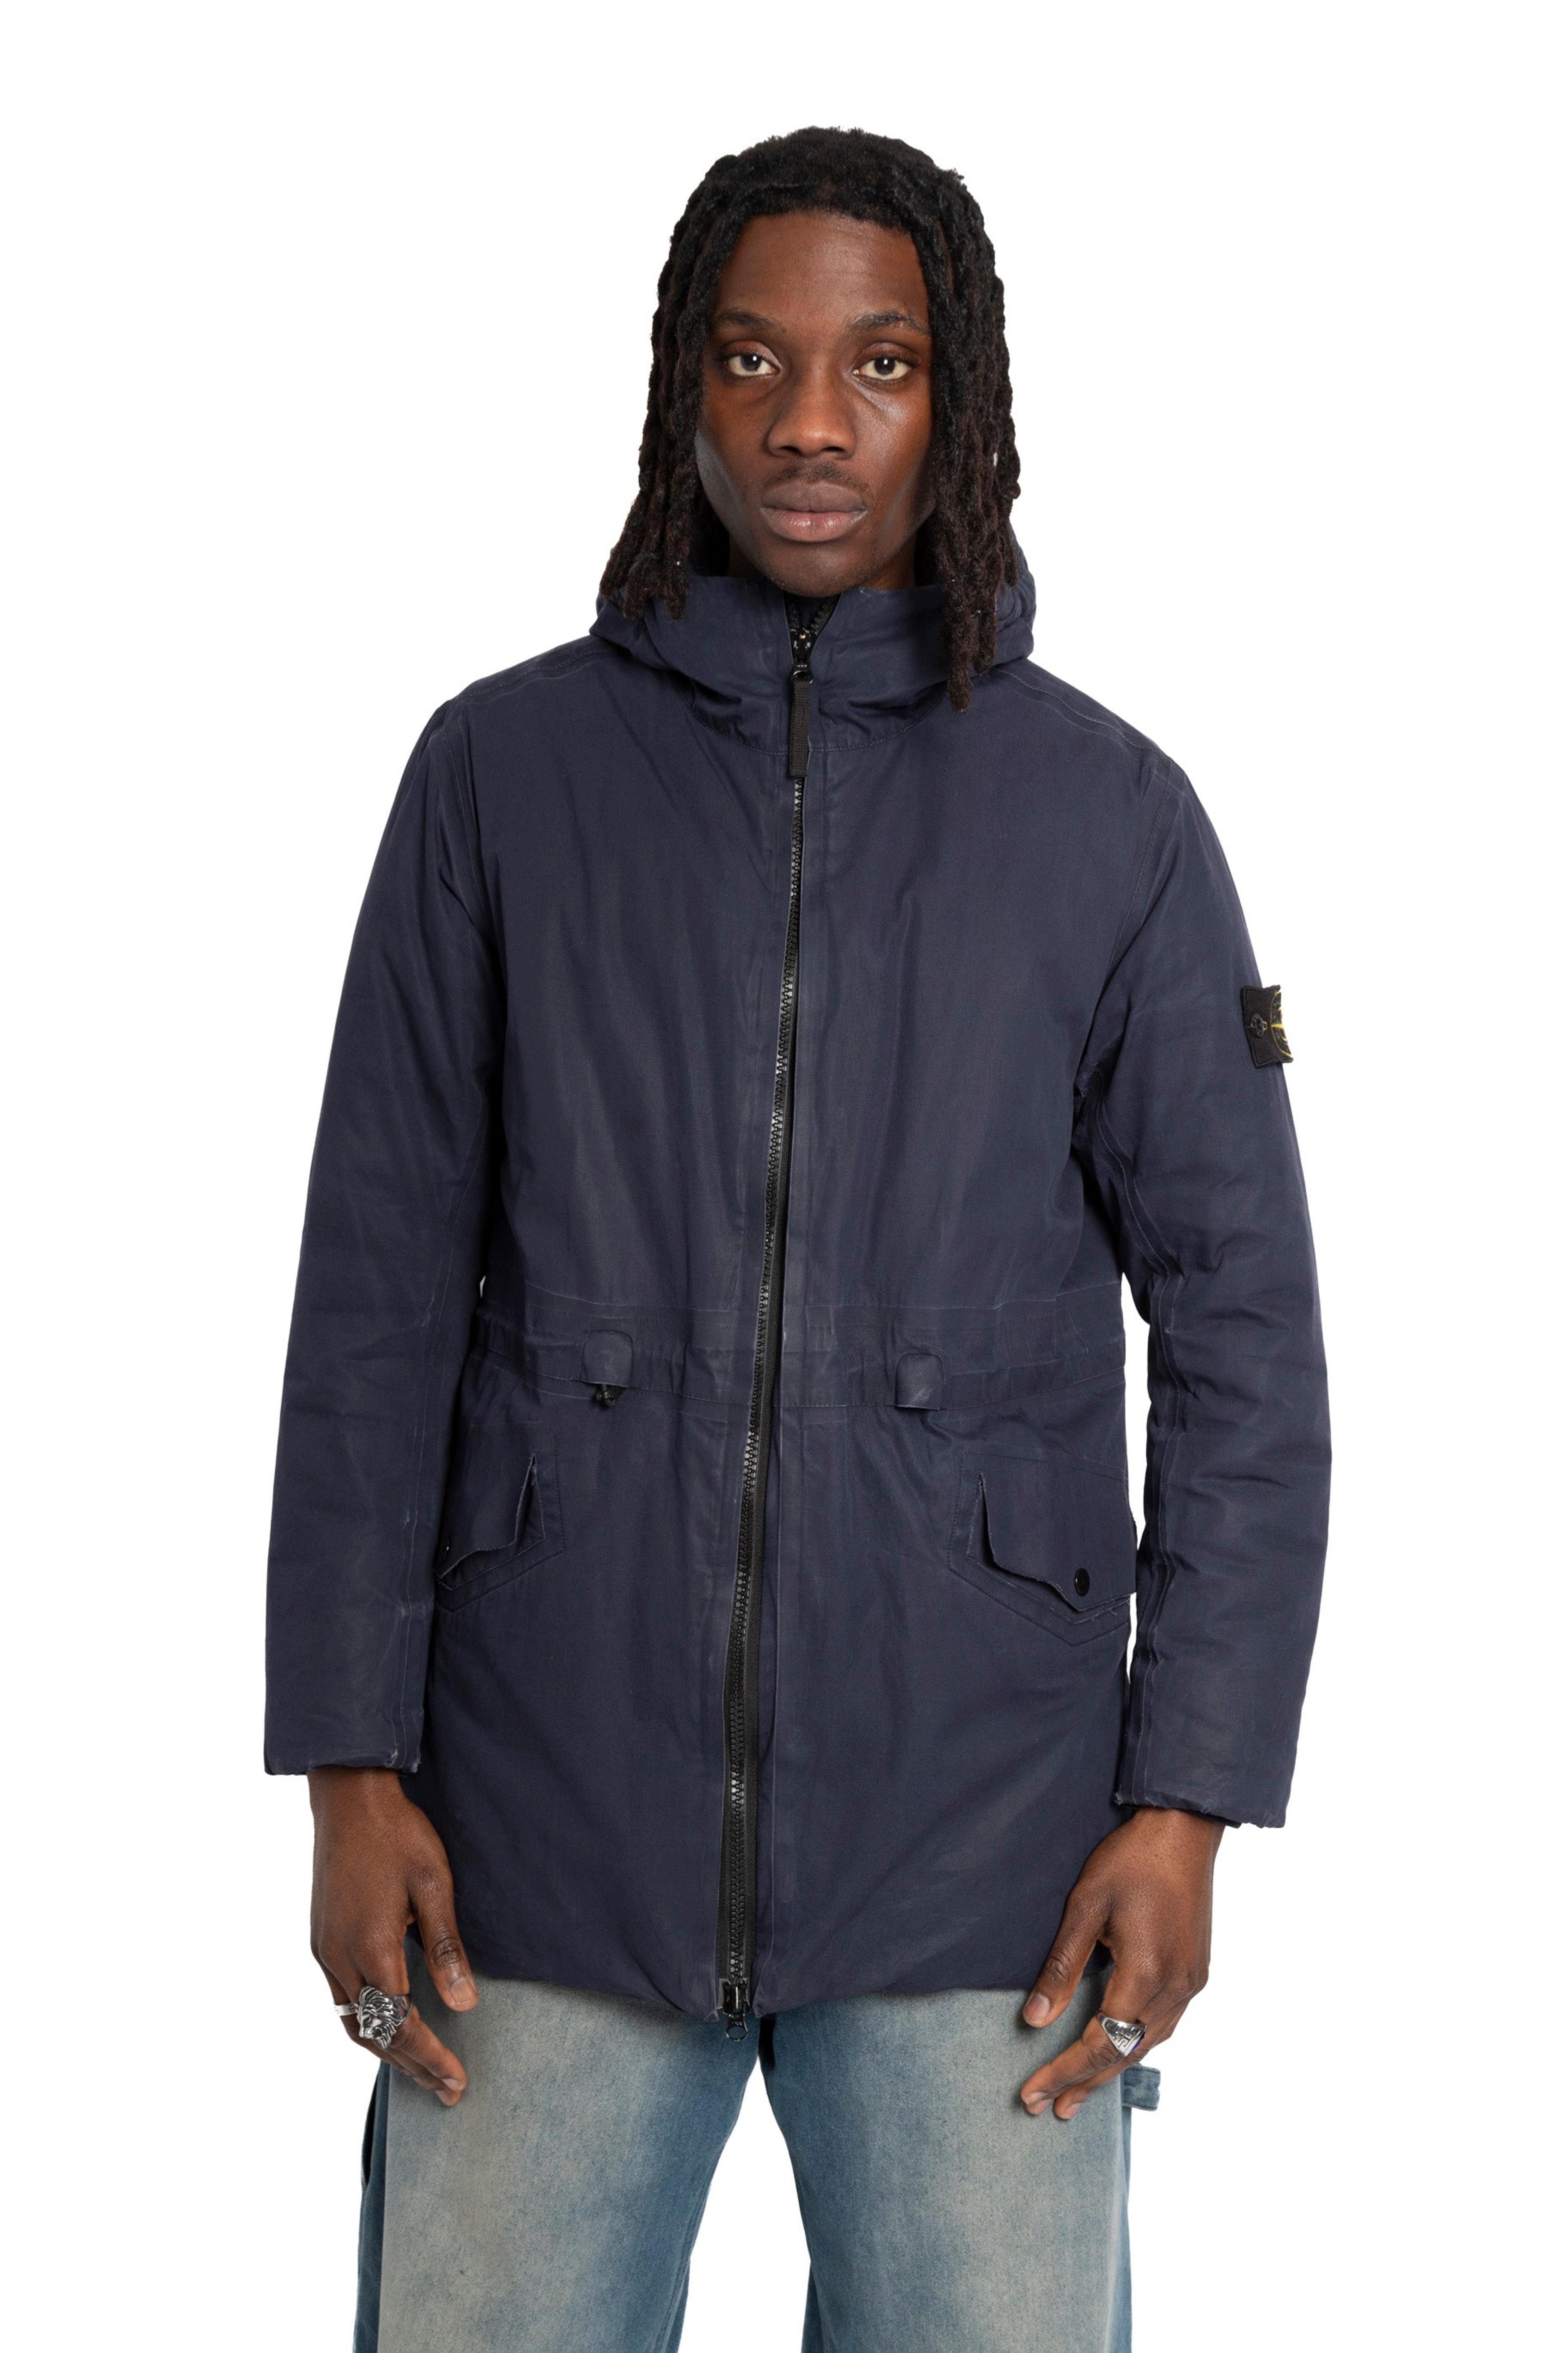 Stone Island A/W 2017 Hooded Quilted Jacket